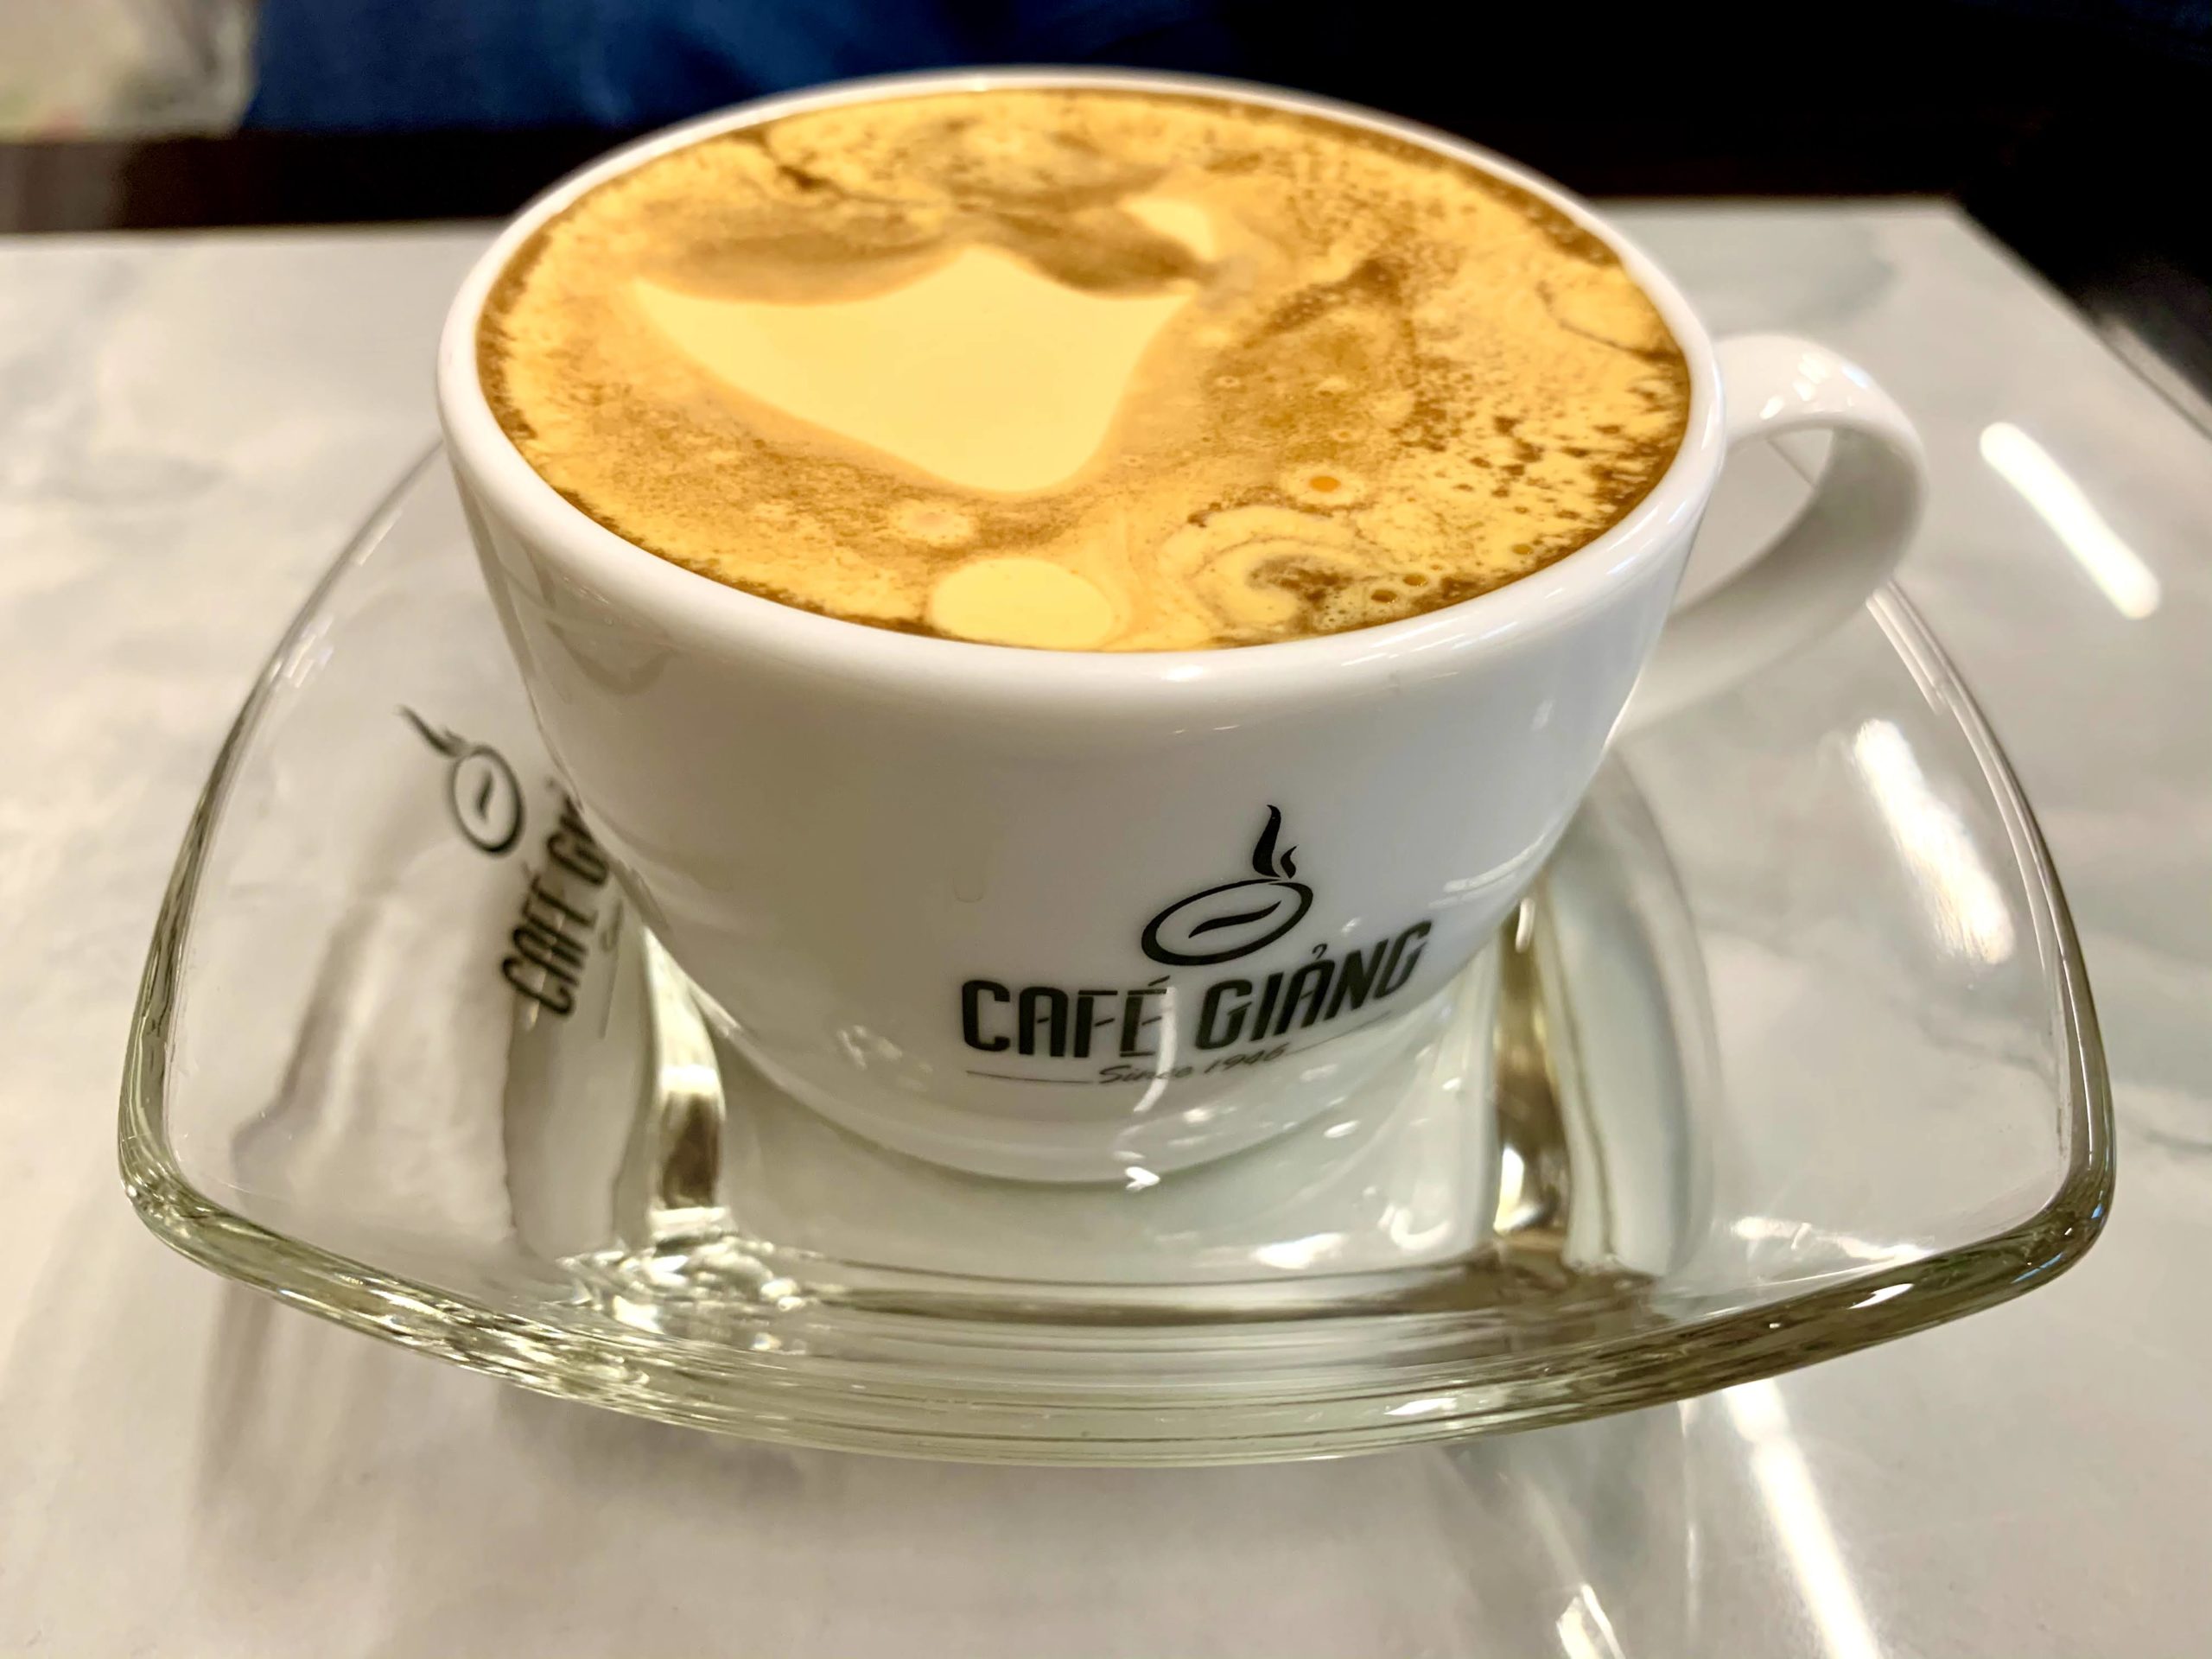 Ready for an out-of-this-world coffee experience, Discover the unique and flavorful egg coffee from Hanoi